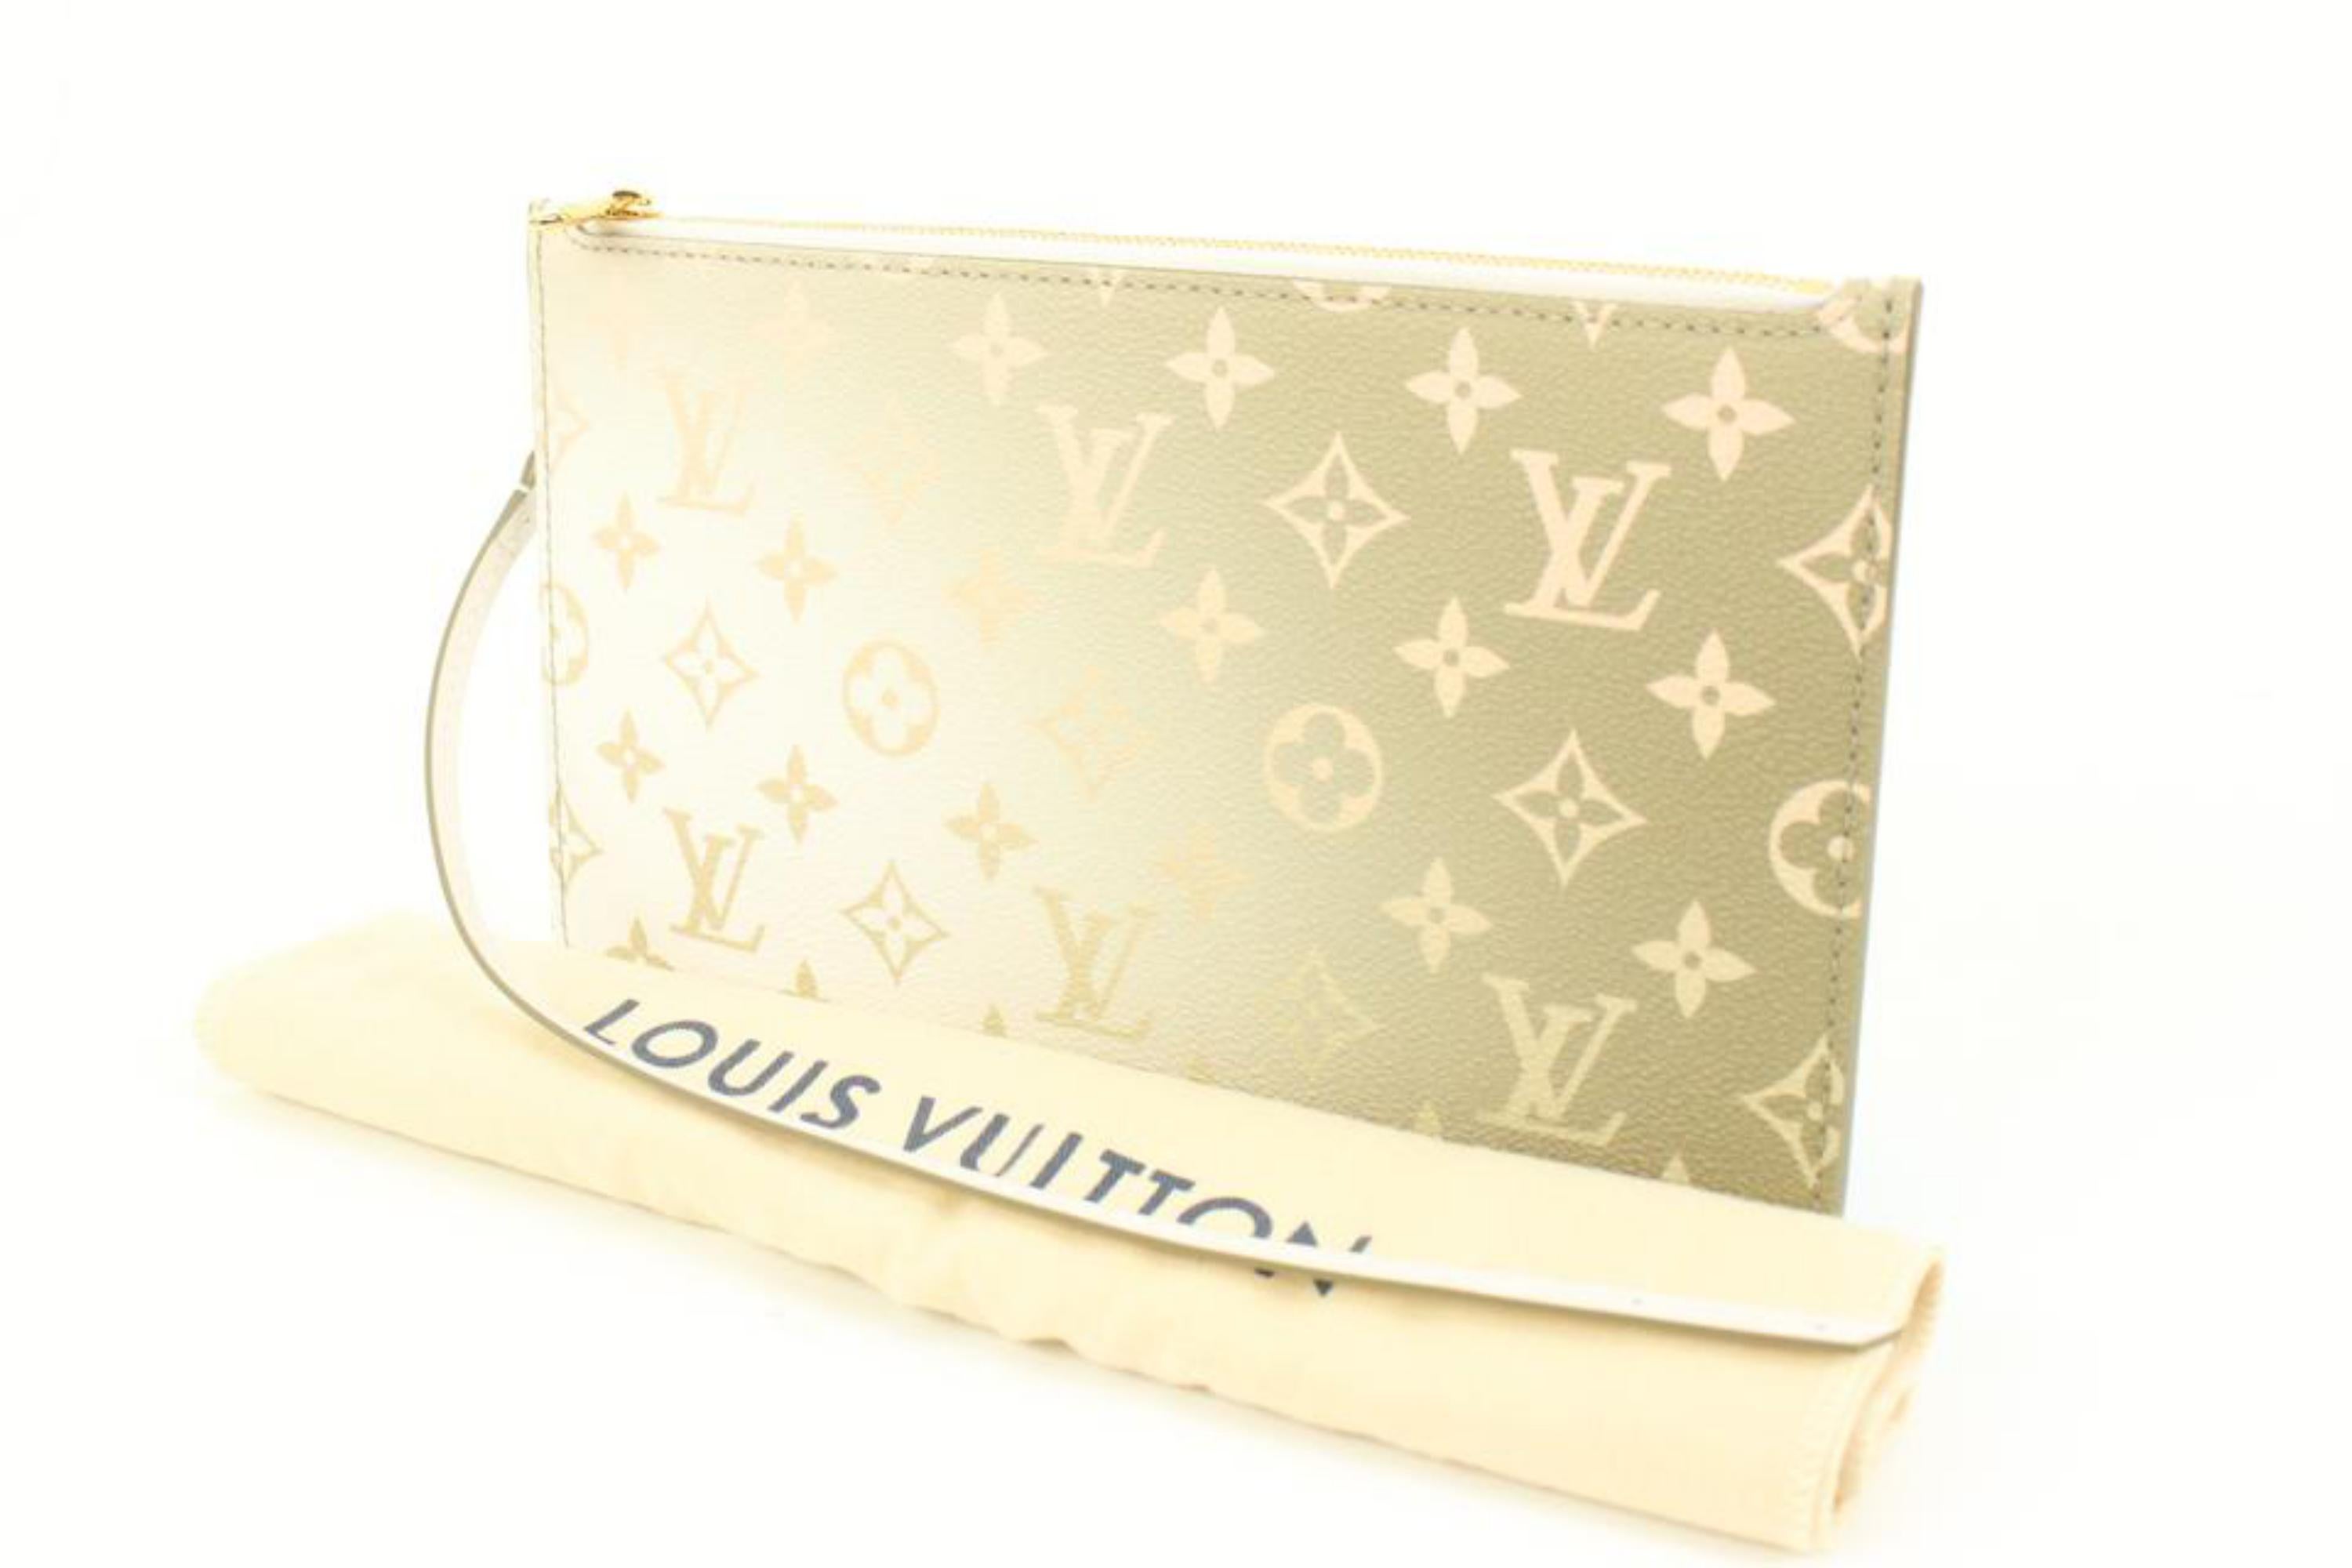 Louis Vuitton Monogram Sunset Khaki Neverfull Pochette MM or GM Wristlet Pou 79lz418s
Date Code/Serial Number: RFID Chip
Made In: France
Measurements: Length:  9.75